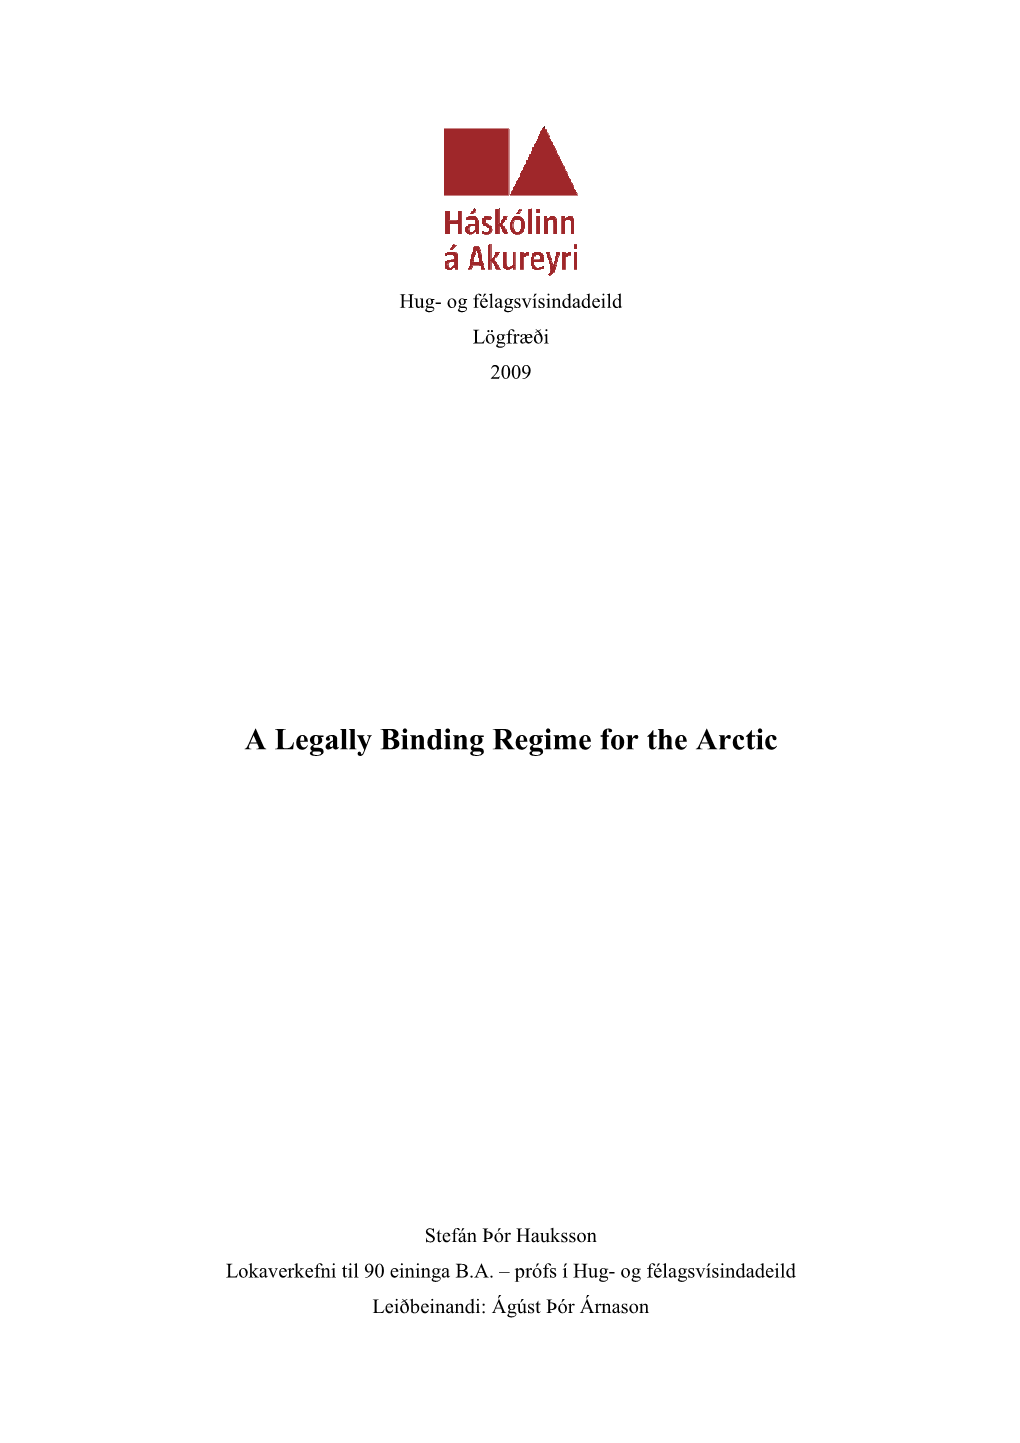 A Legally Binding Regime for the Arctic